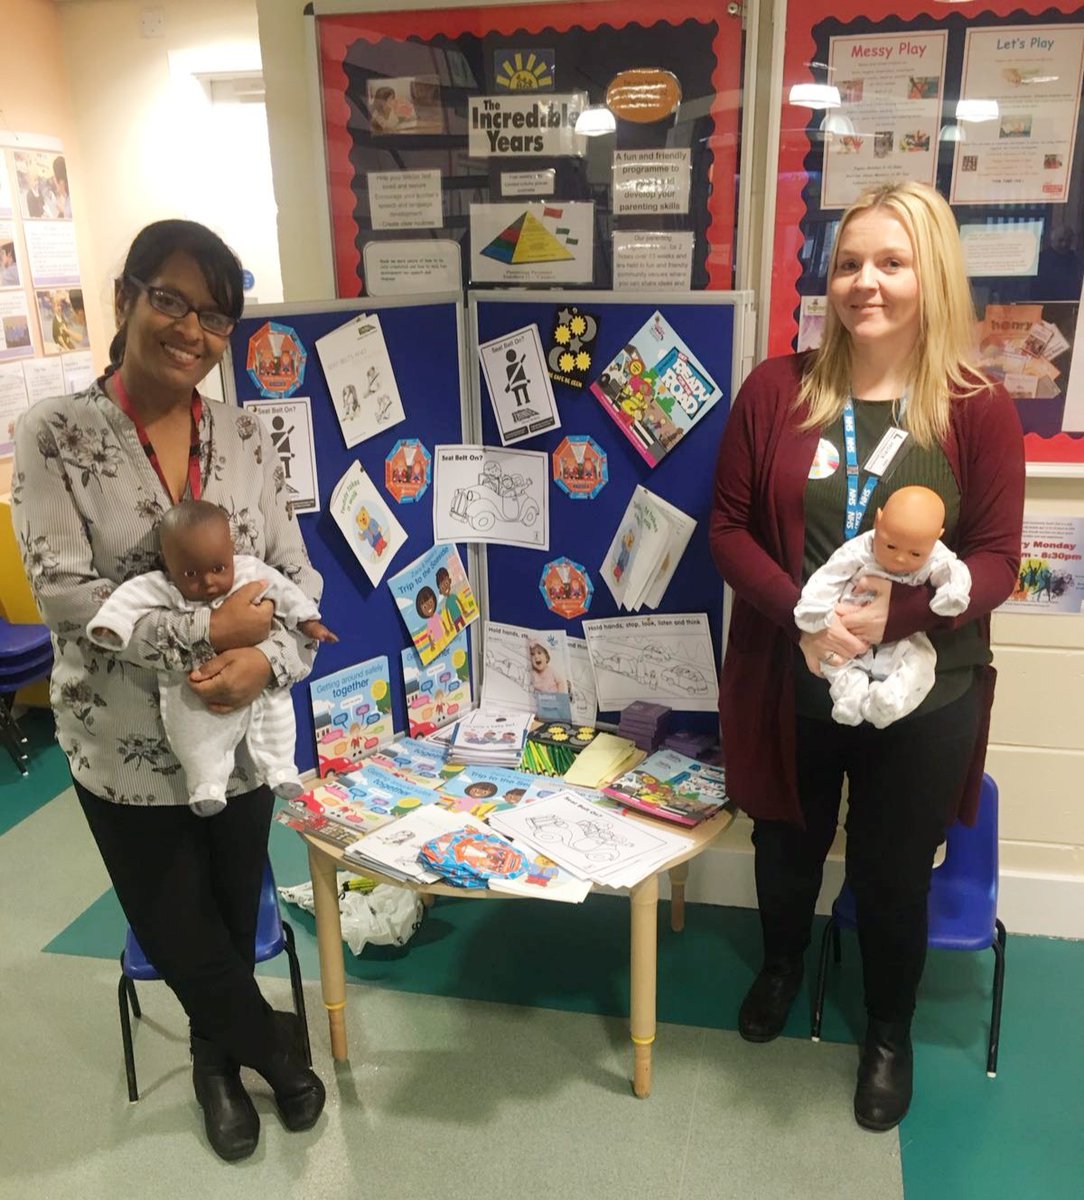 Health Visitors from the Bradford East Cluster proactively delivering road safety advice from Barkerend Children's Centre.

Important messages being delivered as part of #bradfordbabyweek

#babyweekbradford #Bradford #healthvisiting #healthvisitor 
#bradfordbabies